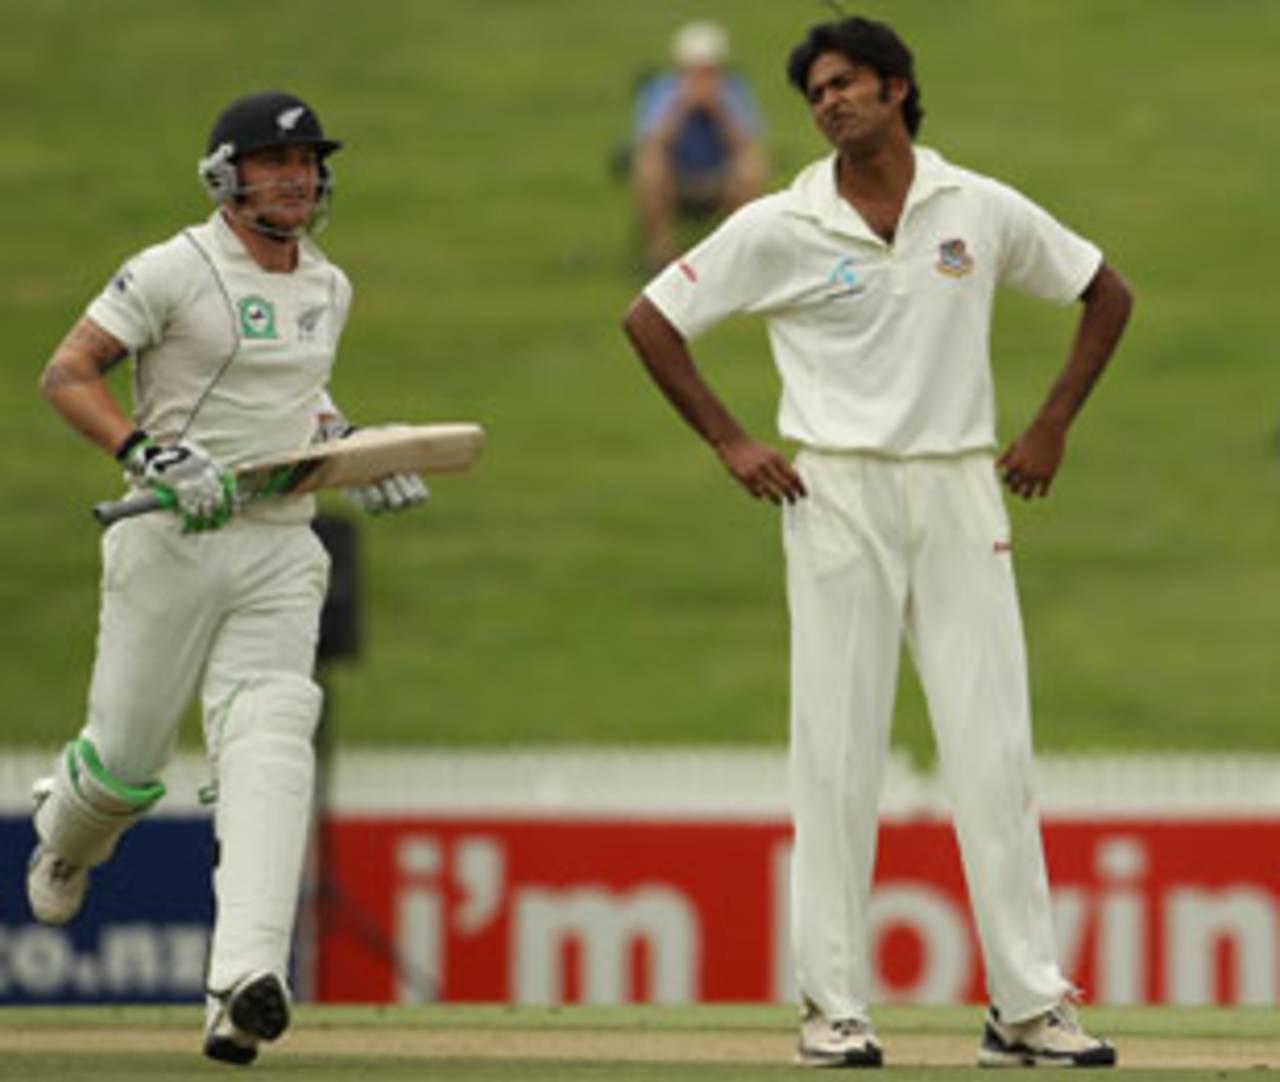 Shahadat Hossain is frustrated by the run-glut, New Zealand v Bangladesh, only Test, Hamilton, 2nd day, February 16, 2010